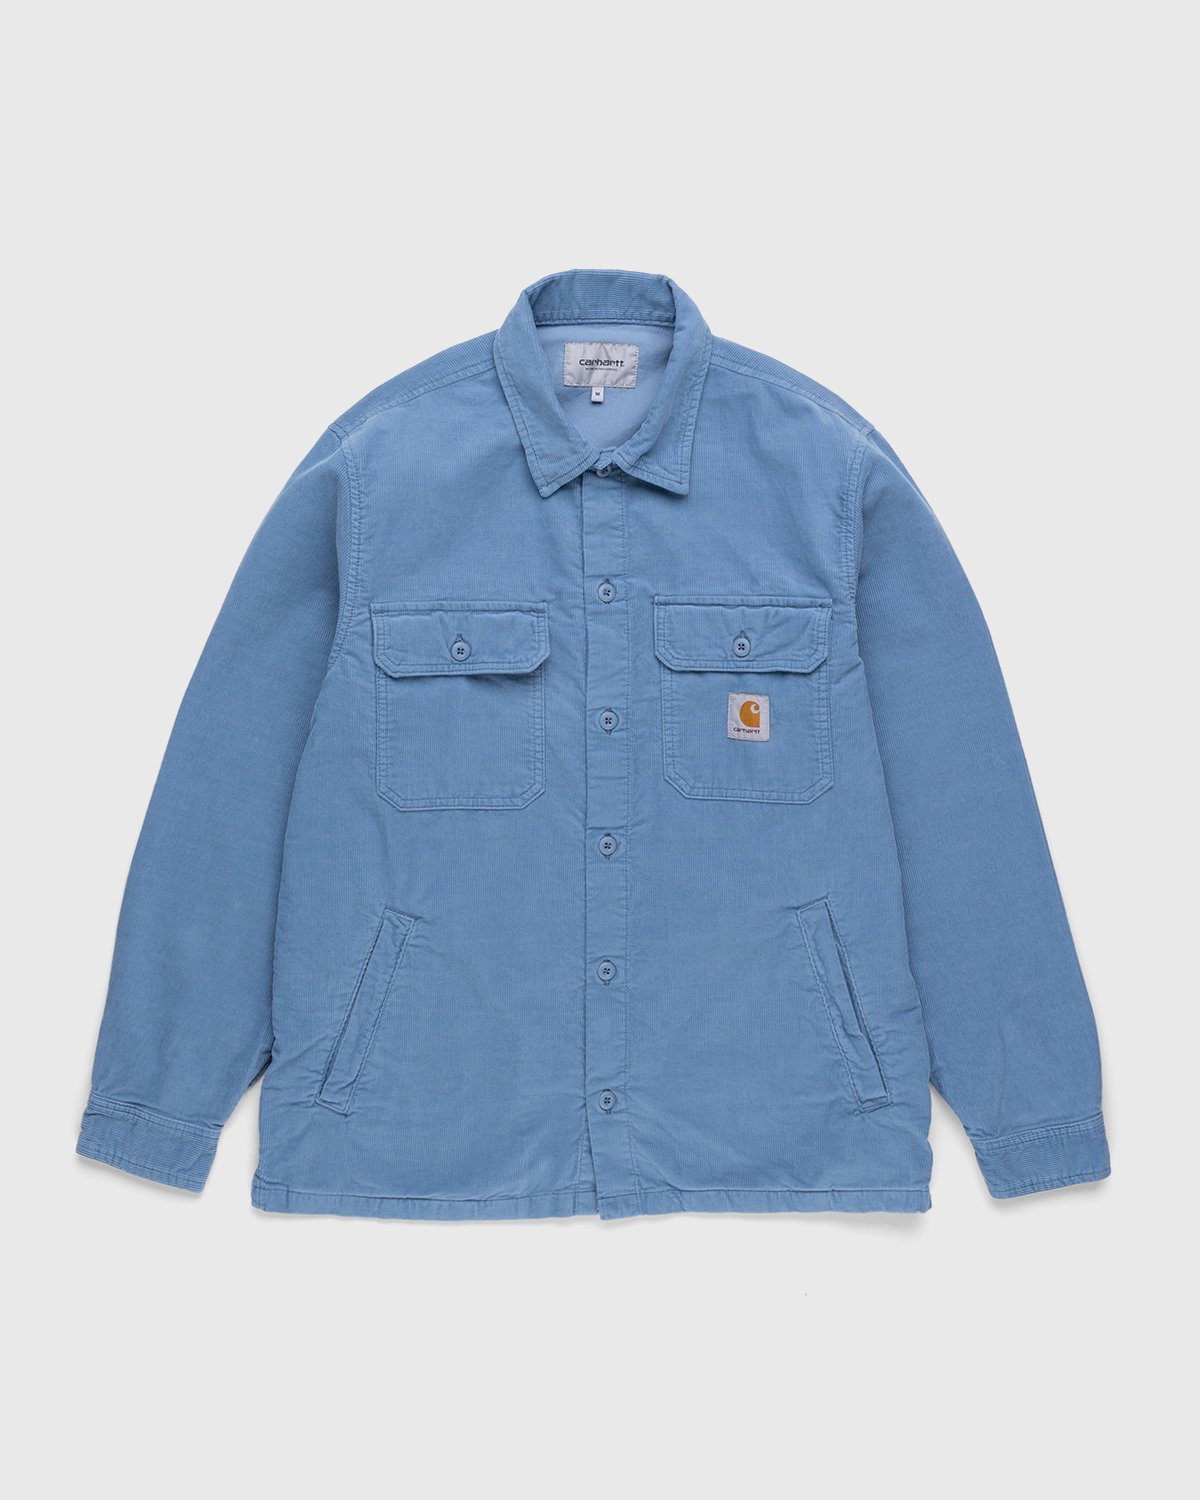 Carhartt WIP - Dixon Shirt Jacket Icy Water Rinsed - Clothing - Blue - Image 1